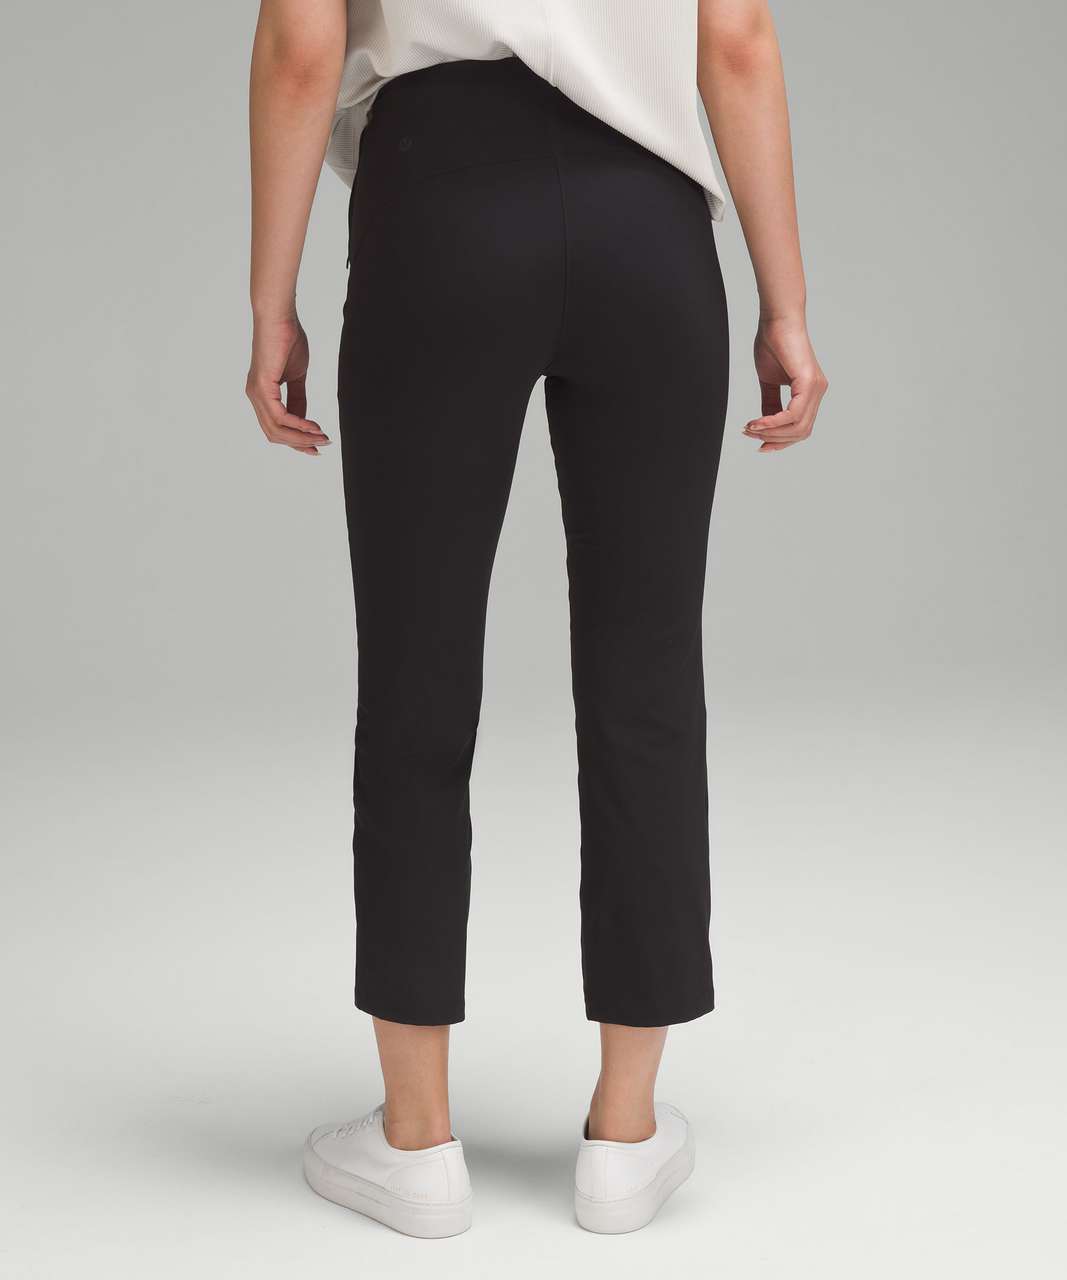 Lululemon Smooth Fit Pull-On High-Rise Cropped Pants - Black